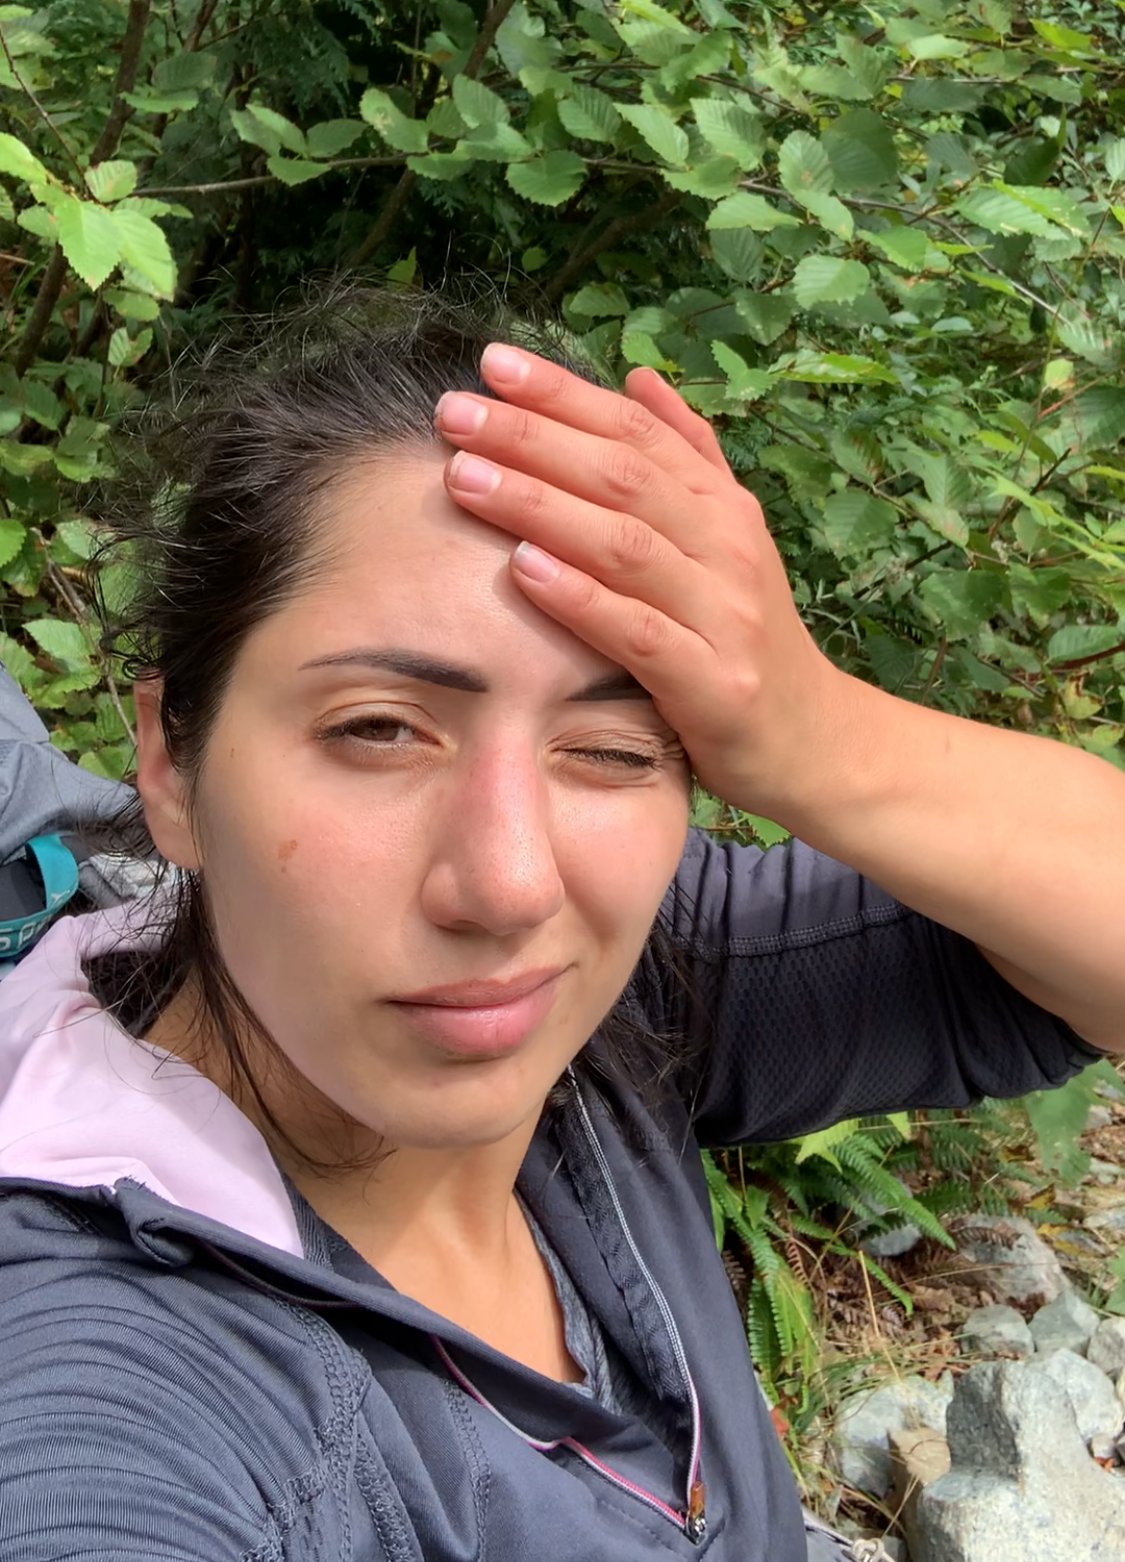 Hiking and facepalming at Golden Ears park, BC, Canada